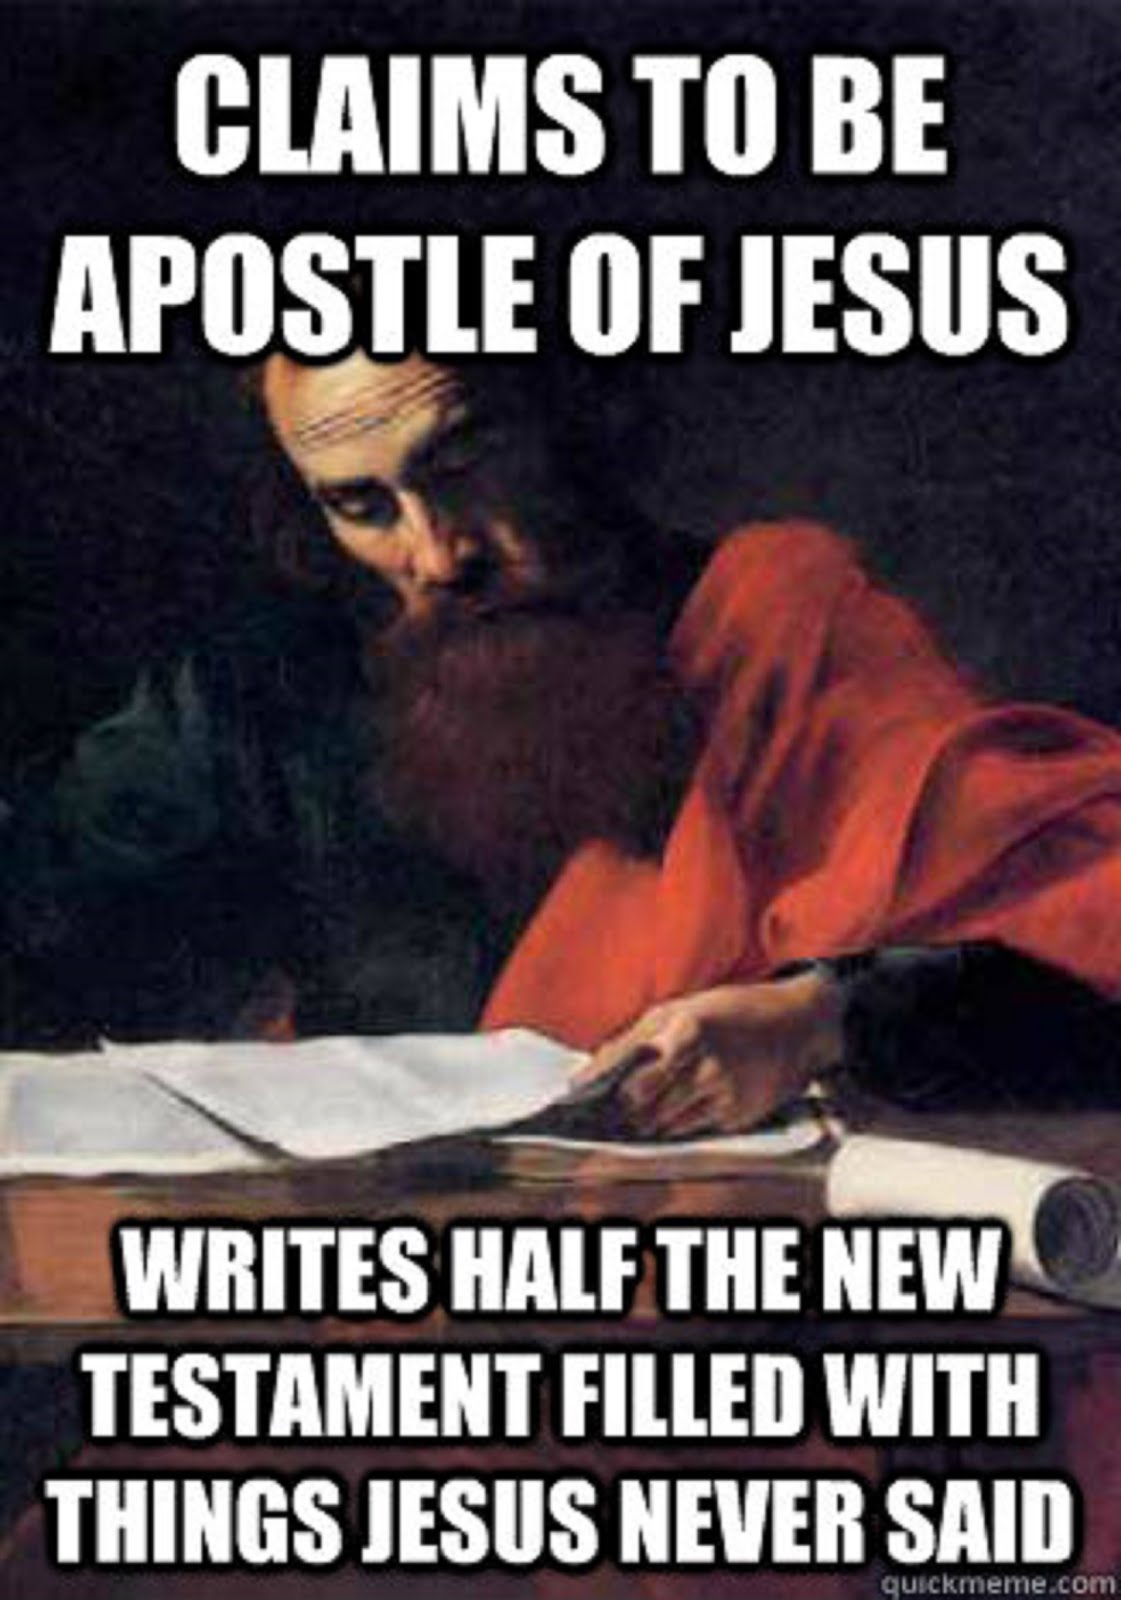 FALSE APOSTLE PAUL - "CLAIMS TO BE AN APOSTLE OF JESUS CHRIST"